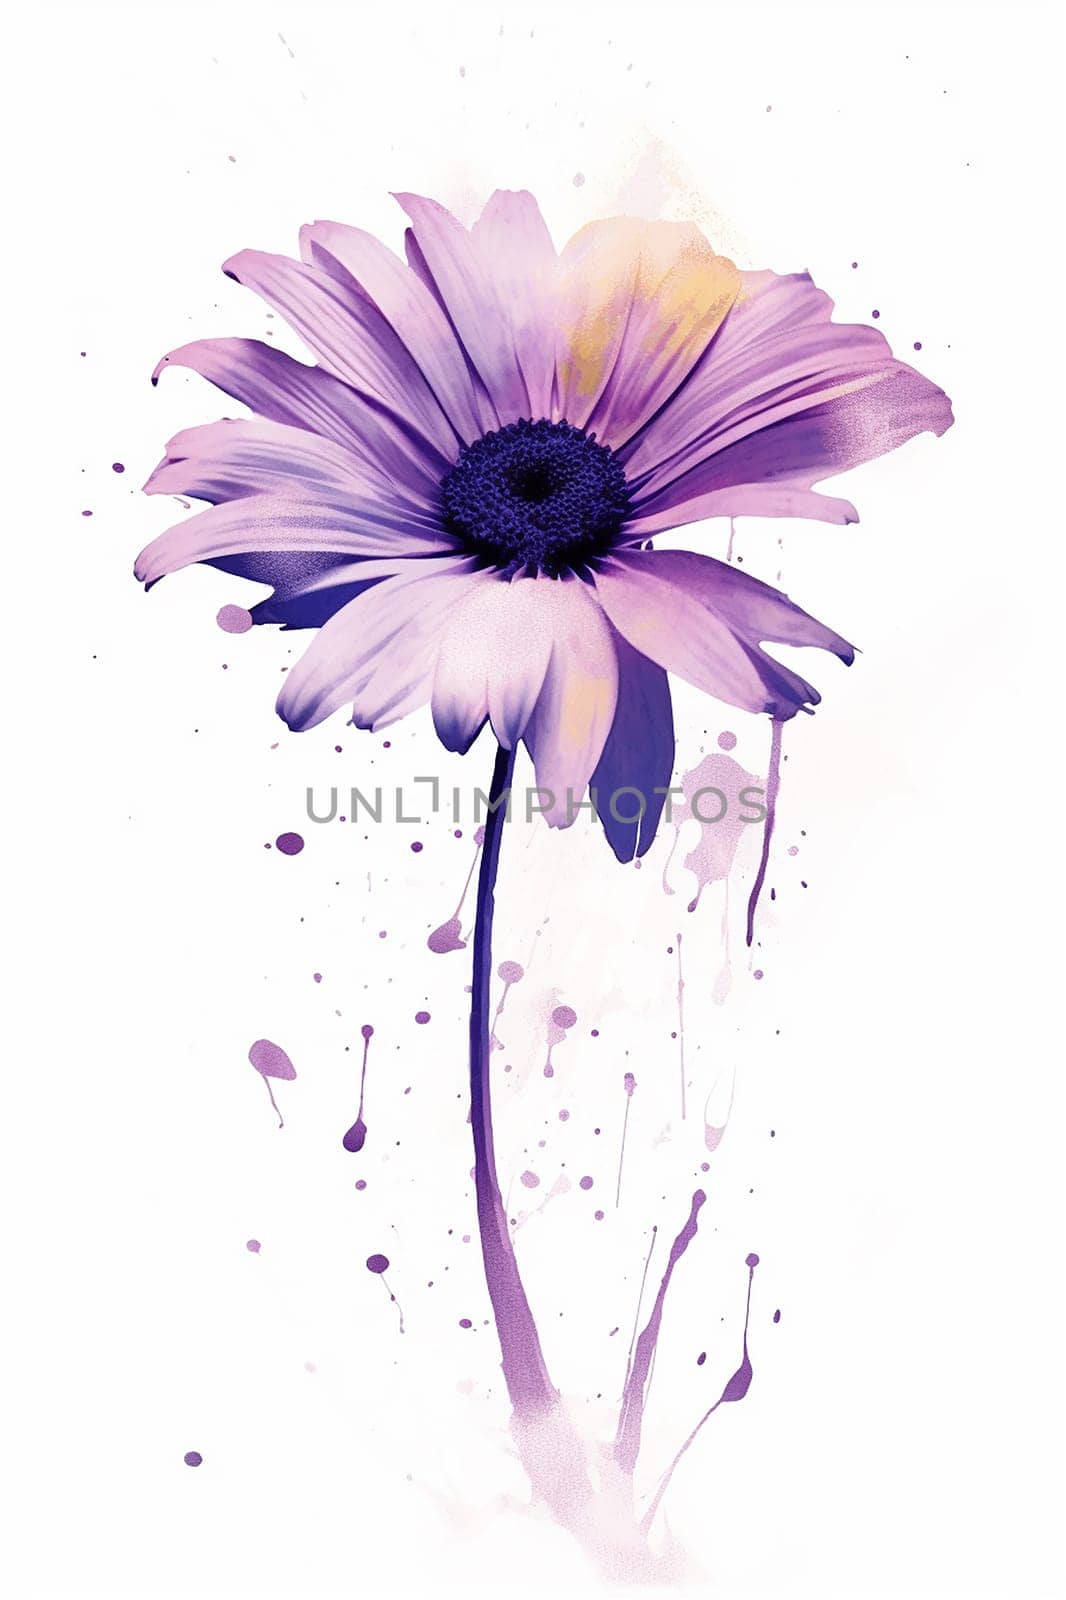 A stylized purple daisy with watercolor splashes.